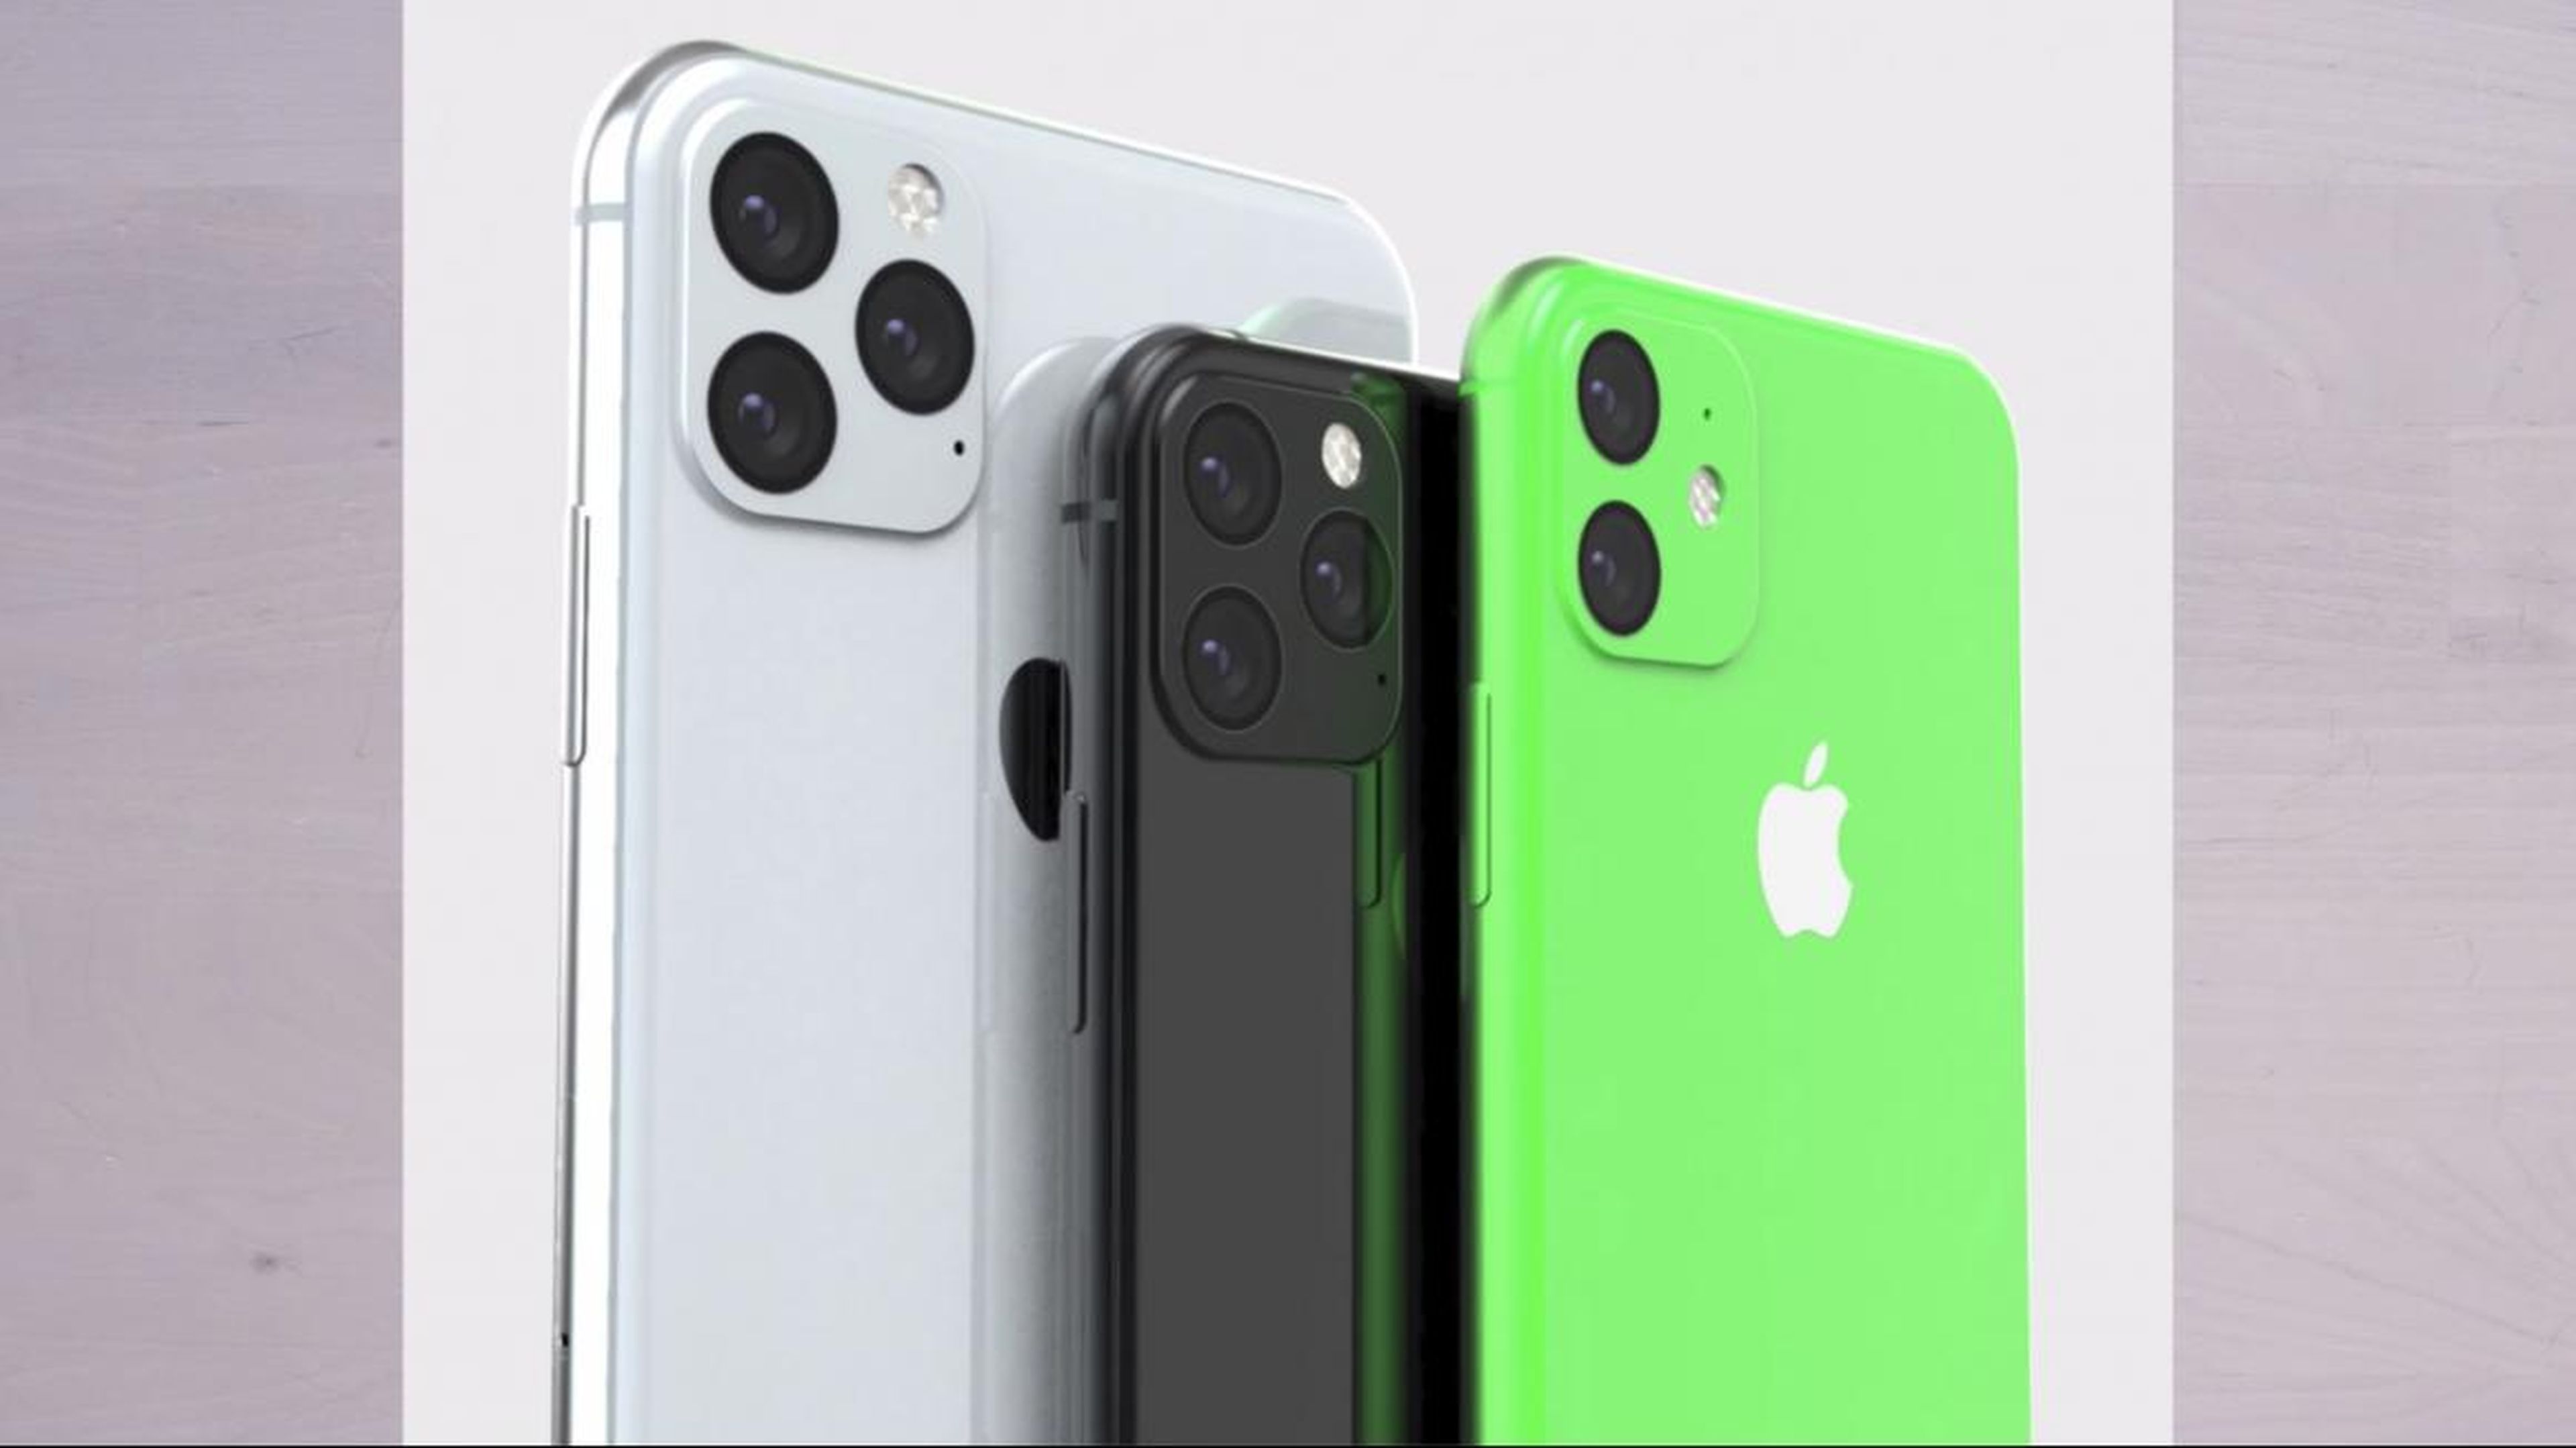 While this new iPhone design may look slightly different from the past couple of years, here's hoping Apple adopts a more original design for the phone, which might support the new 5G wireless standard.